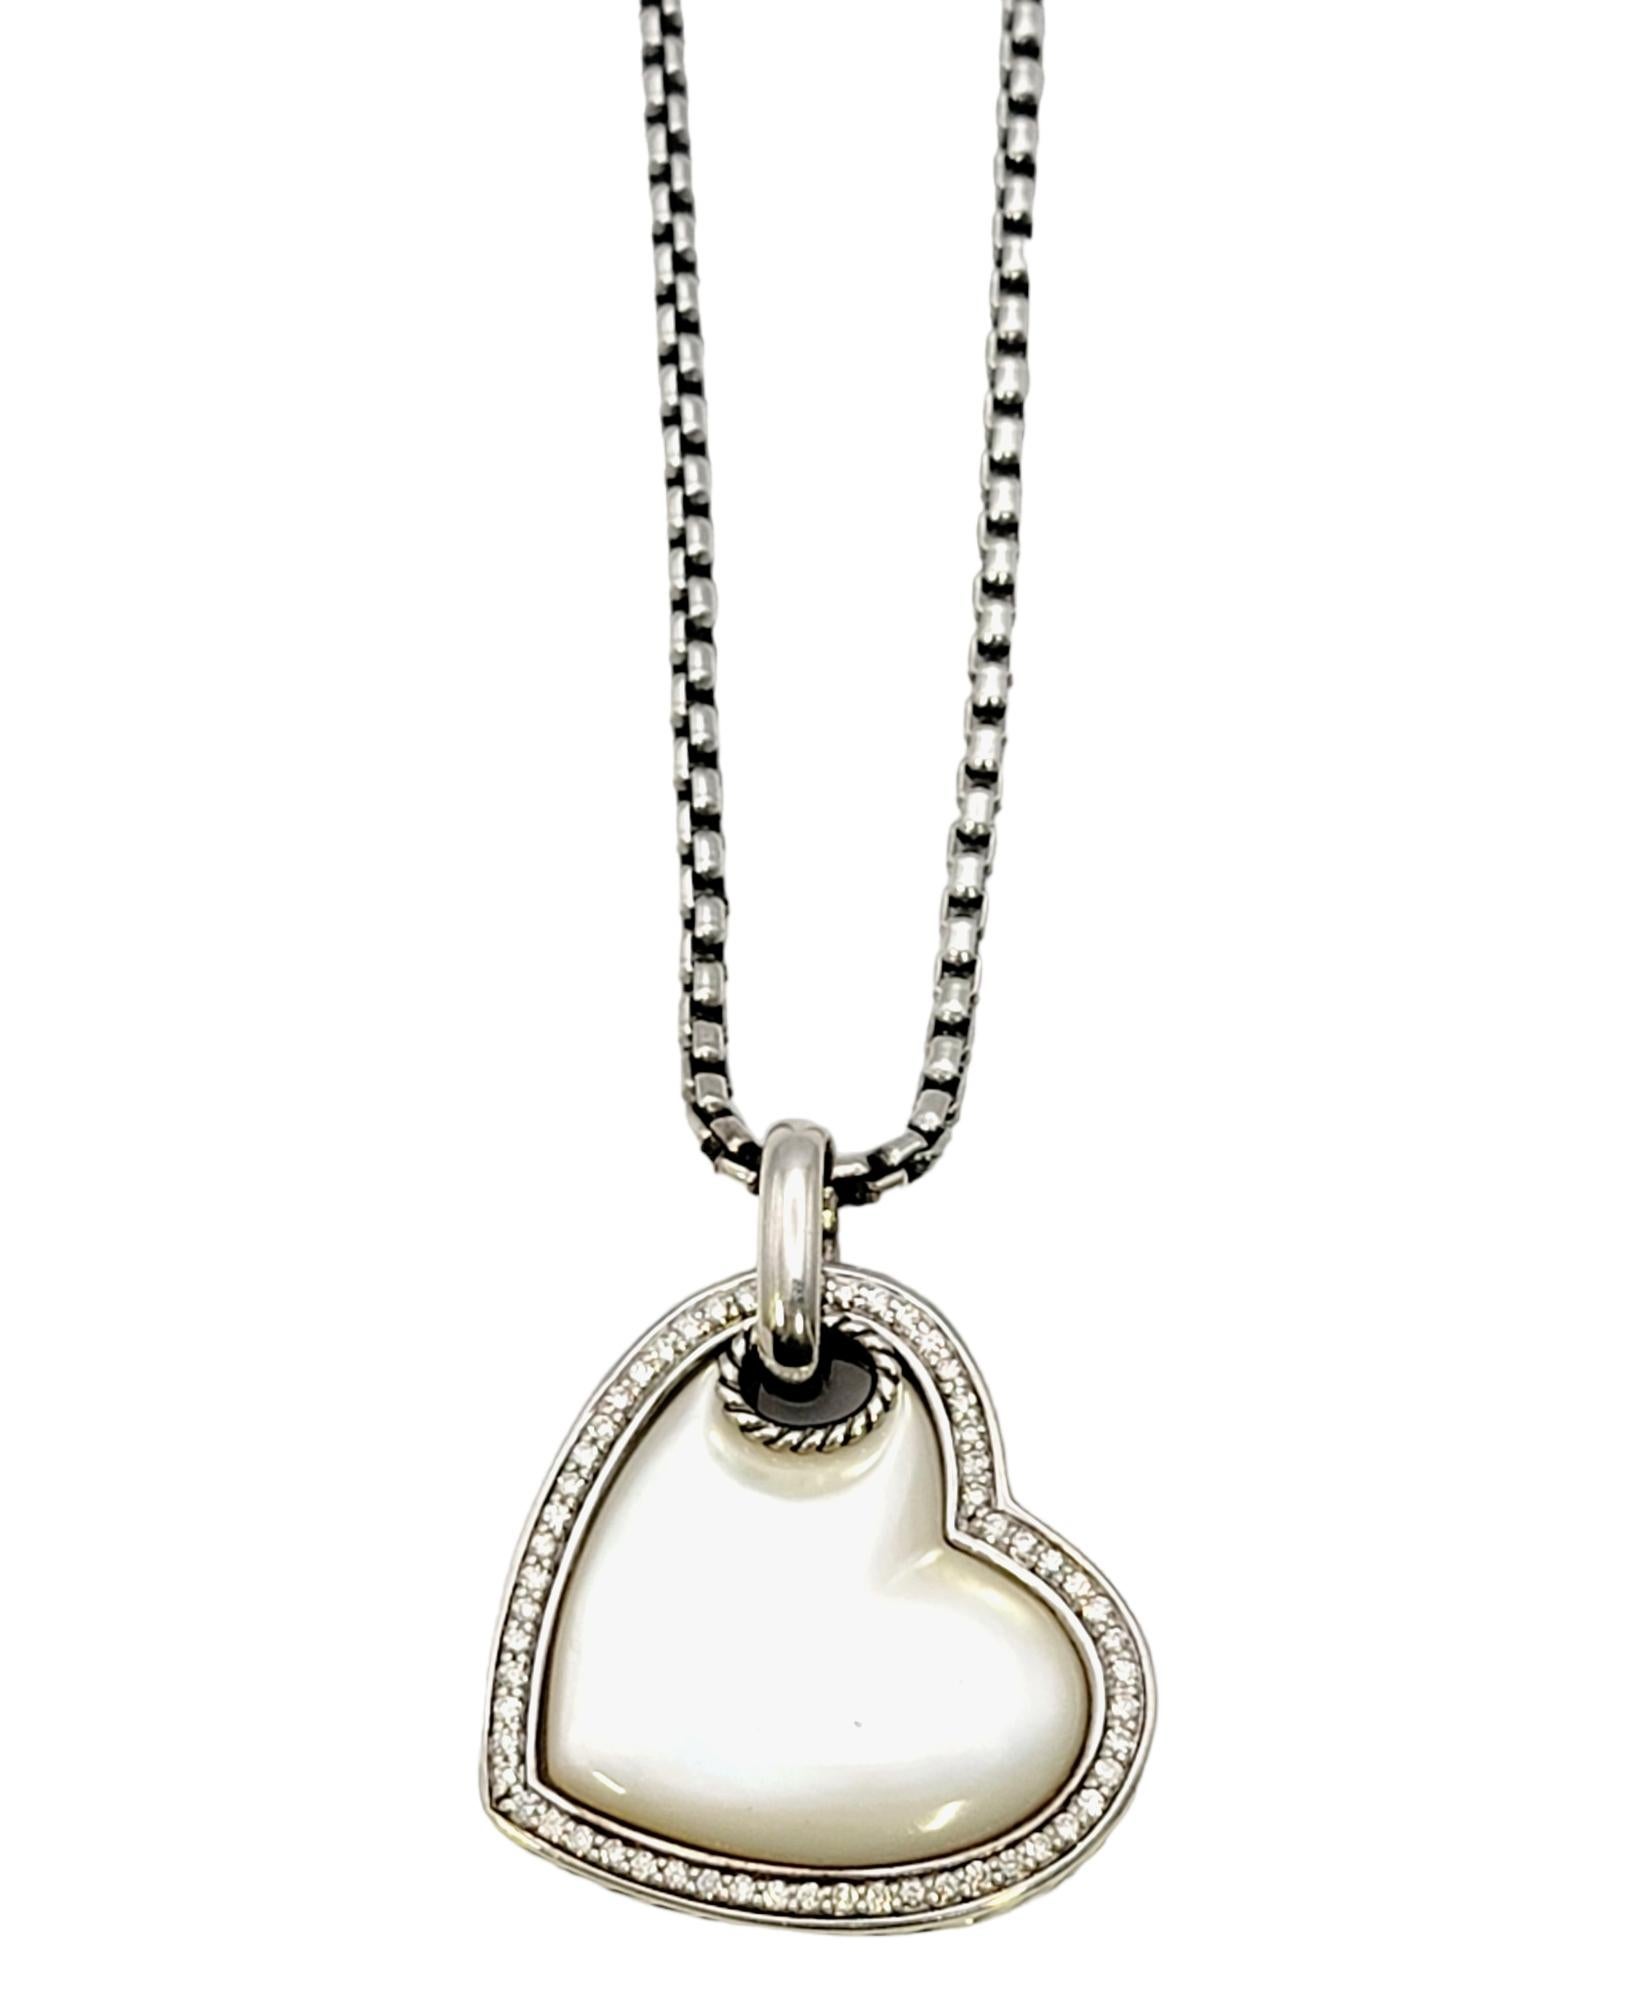 Romantic diamond and Mother of pearl heart necklace by popular jewelry designer, David Yurman. Founded in 1980 by artists David and Sybil Yurman, the company is, in their own words, “one long art project.” Their ability to fuse fashion, art and